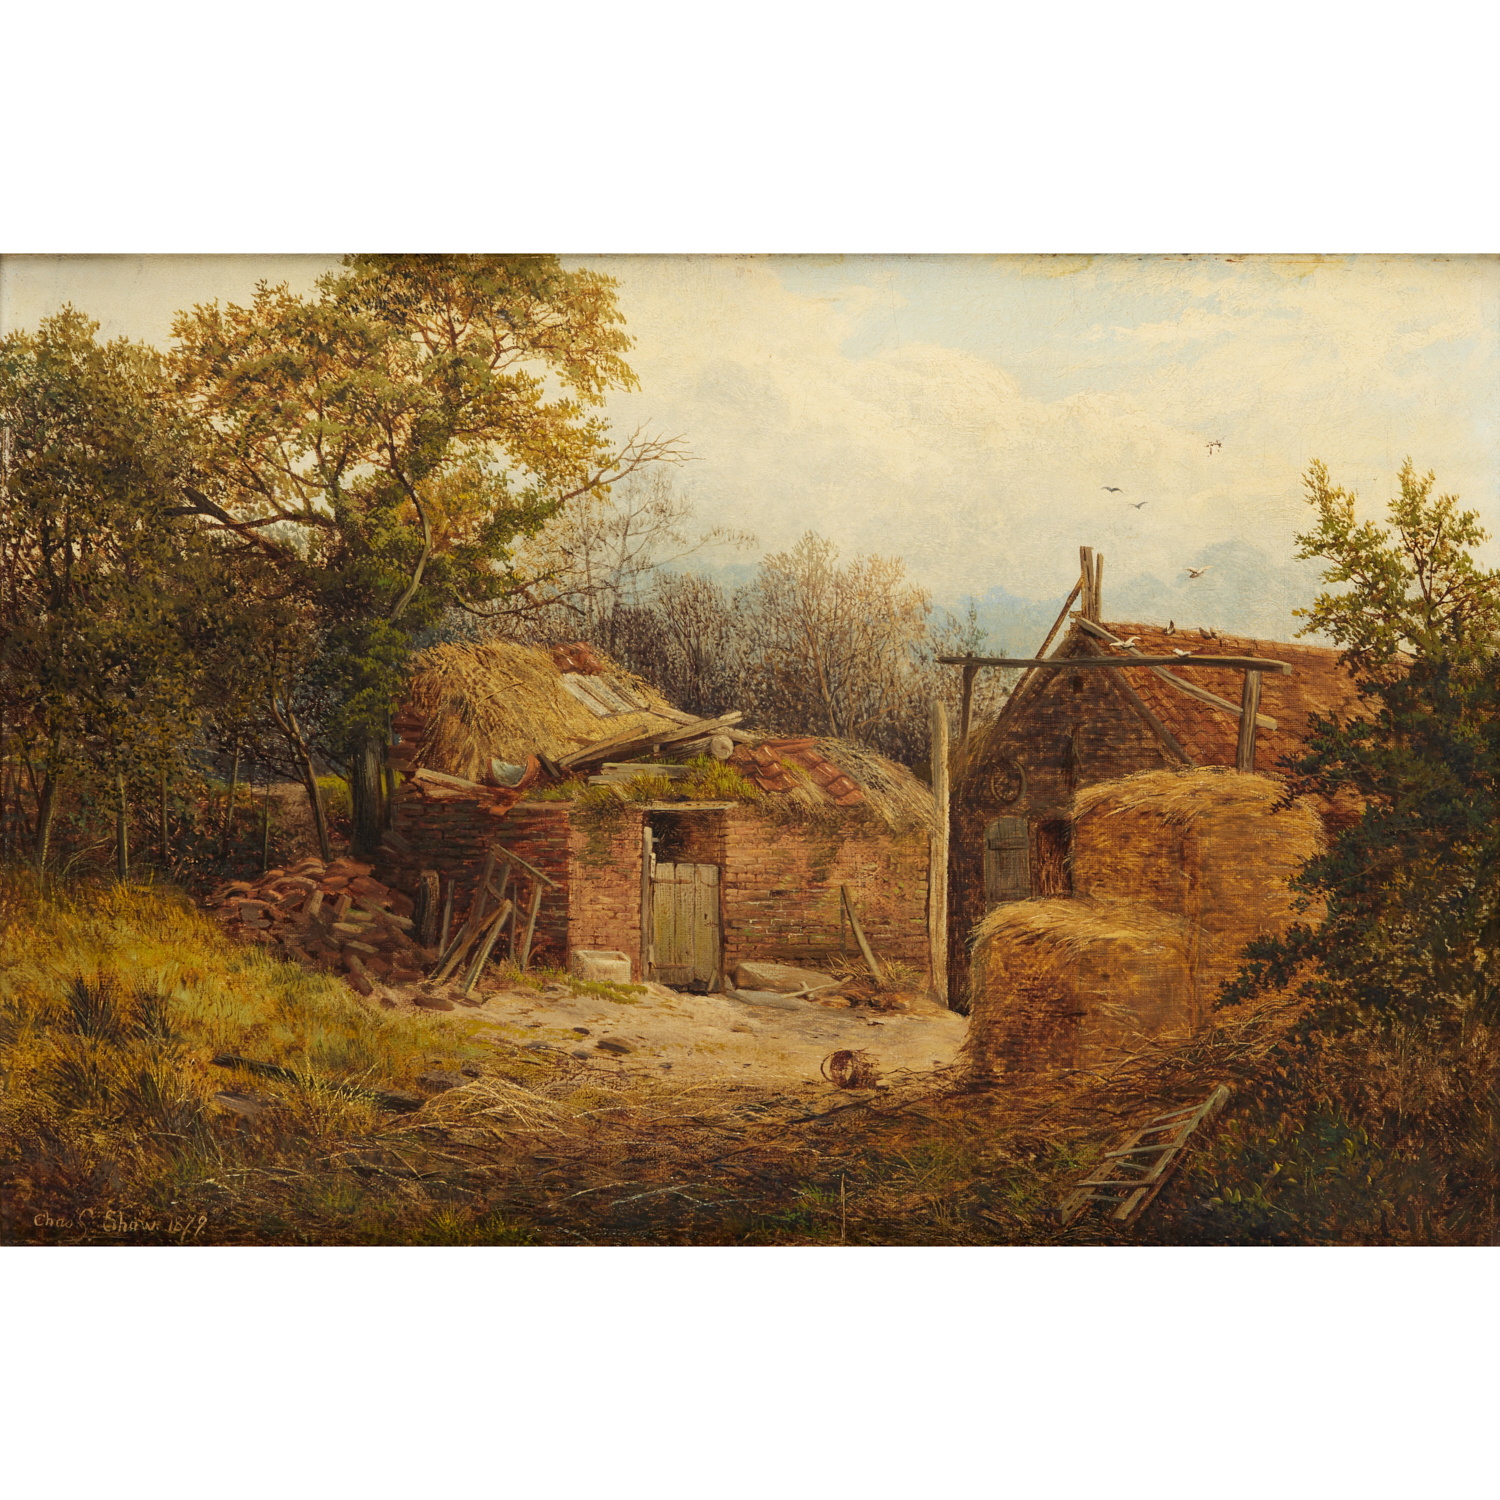 CHARLES S. SHAW, OIL ON CANVAS,